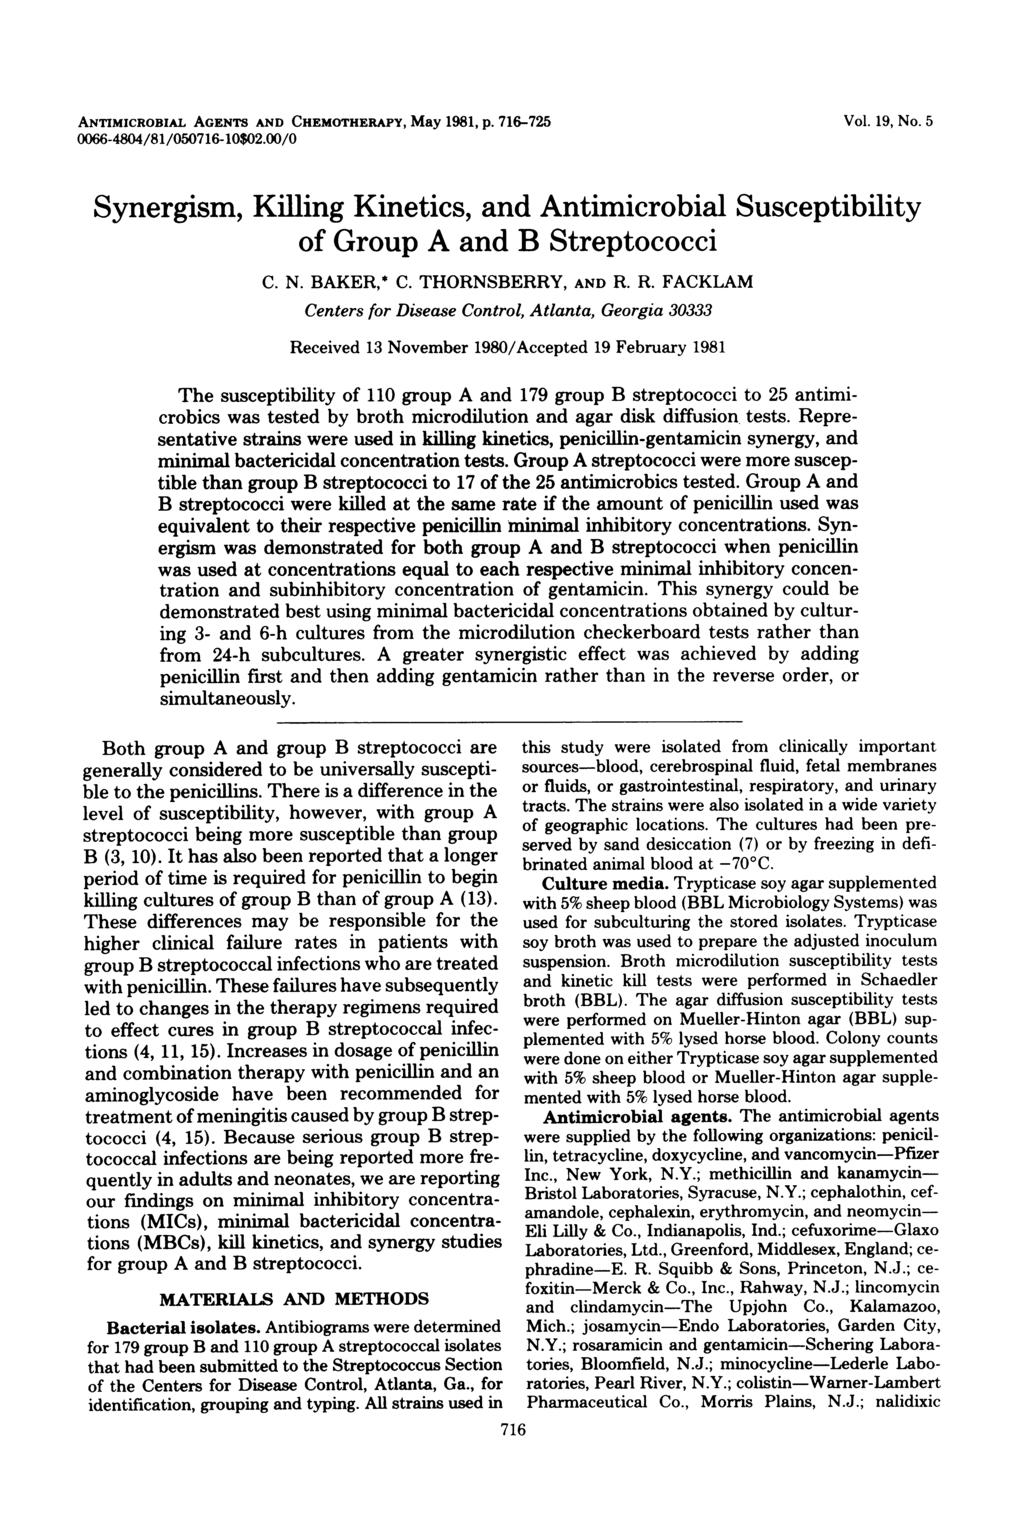 ANTIMICROBIAL AGENTS AND CHEMOTHERAPY, May 1981, p. 716-725 0066-4804/81/050716-10$02.00/0 Vol. 19, No. 5 Synergism, Killing Kinetics, and Antimicrobial Susceptibility of Group A and B Streptococci C.